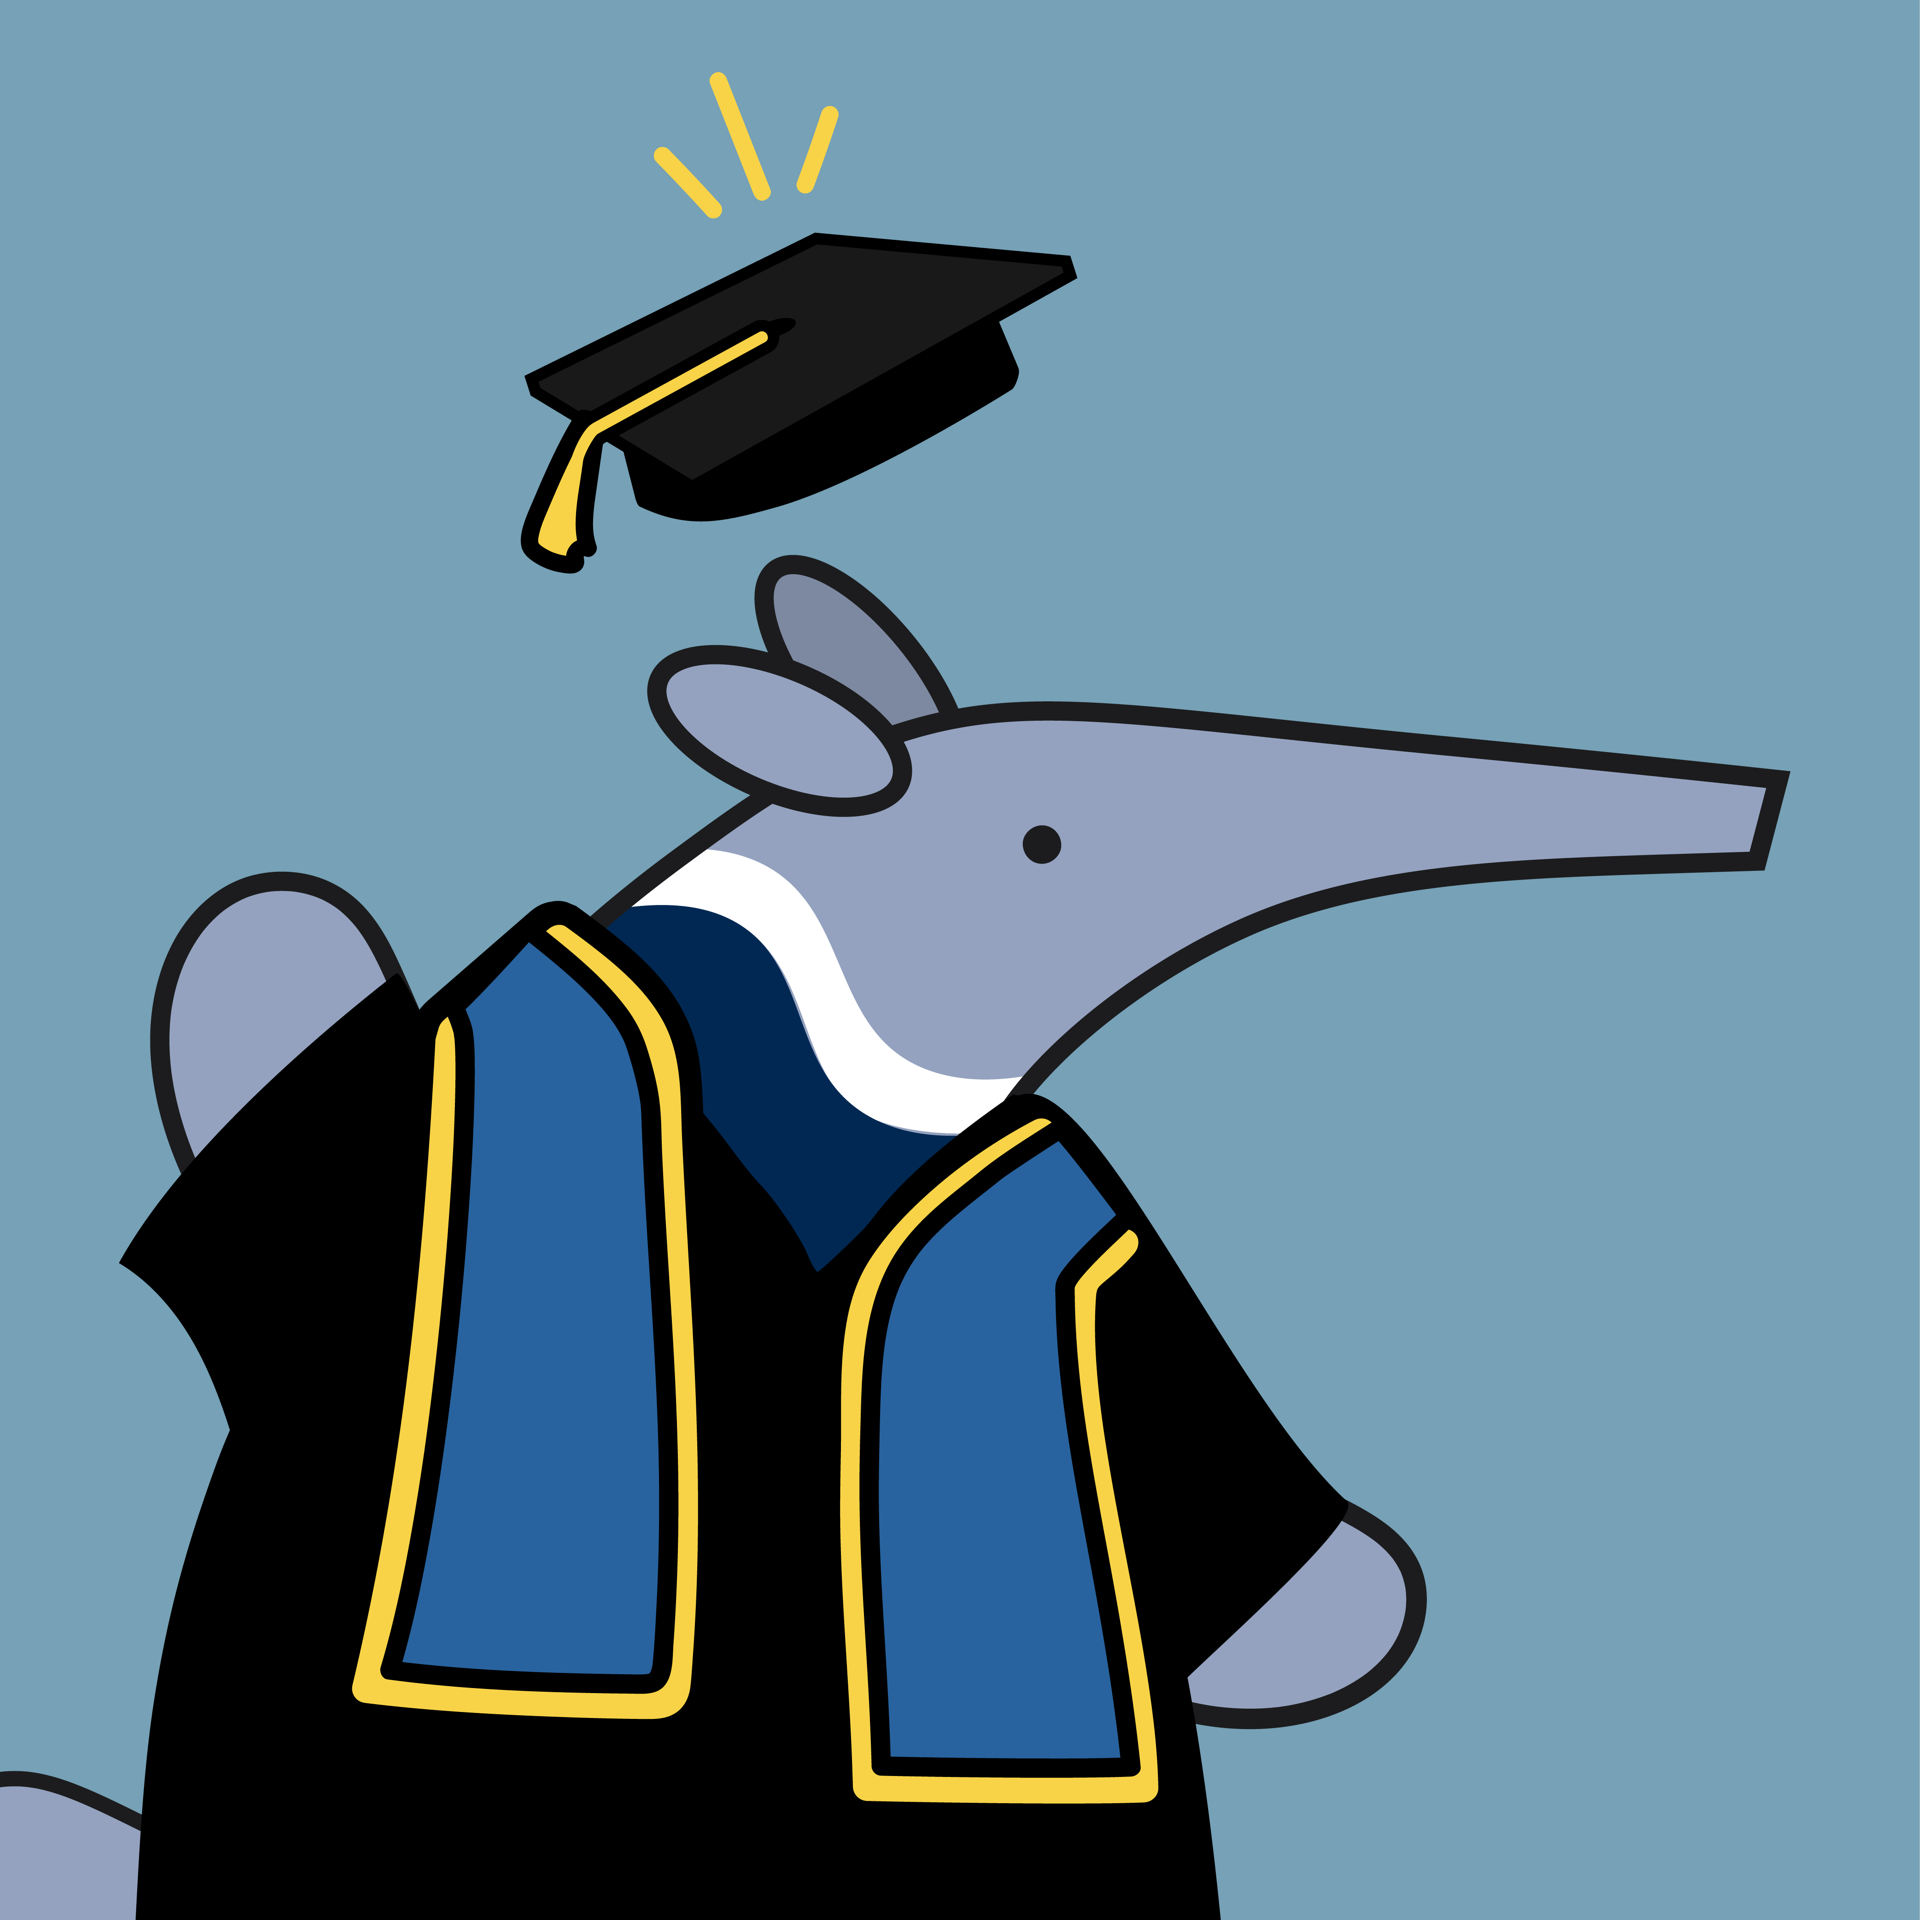 Graduate Anteater with cap and gown